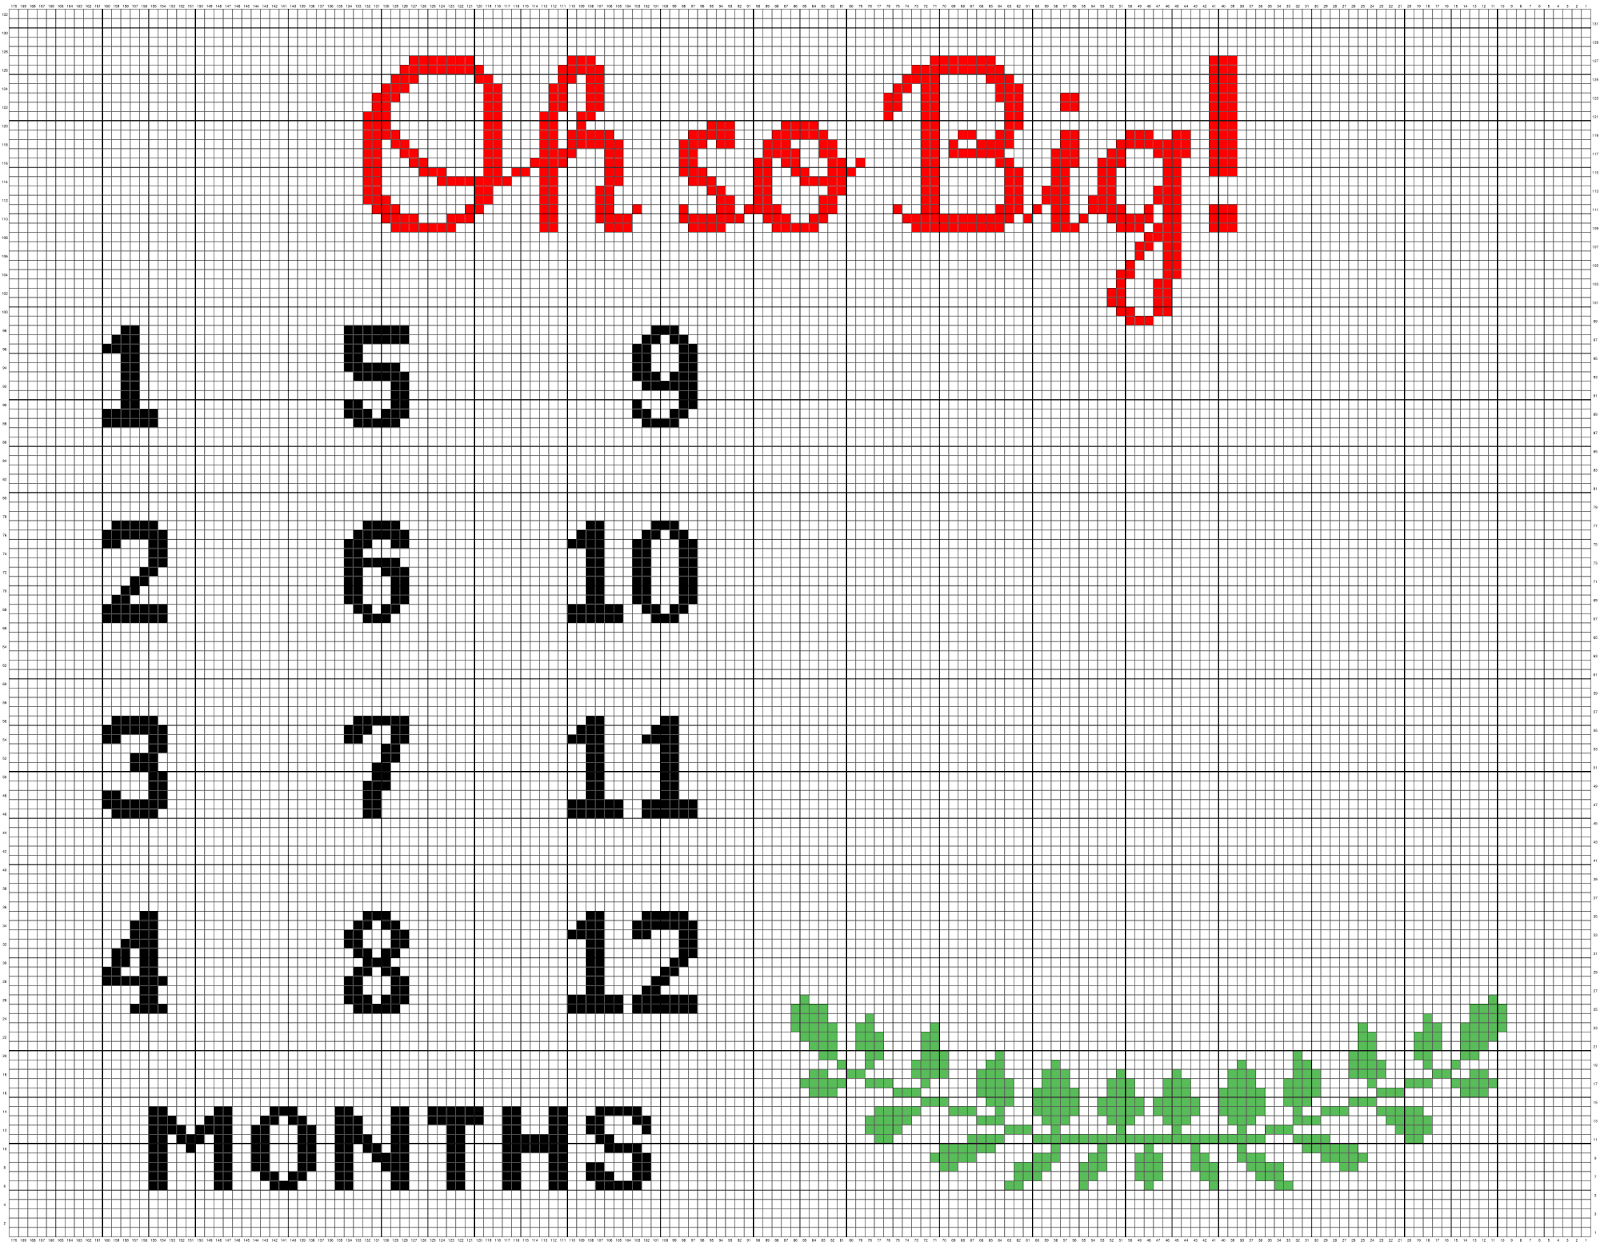 oh so big monthly baby growth blanket graph pattern